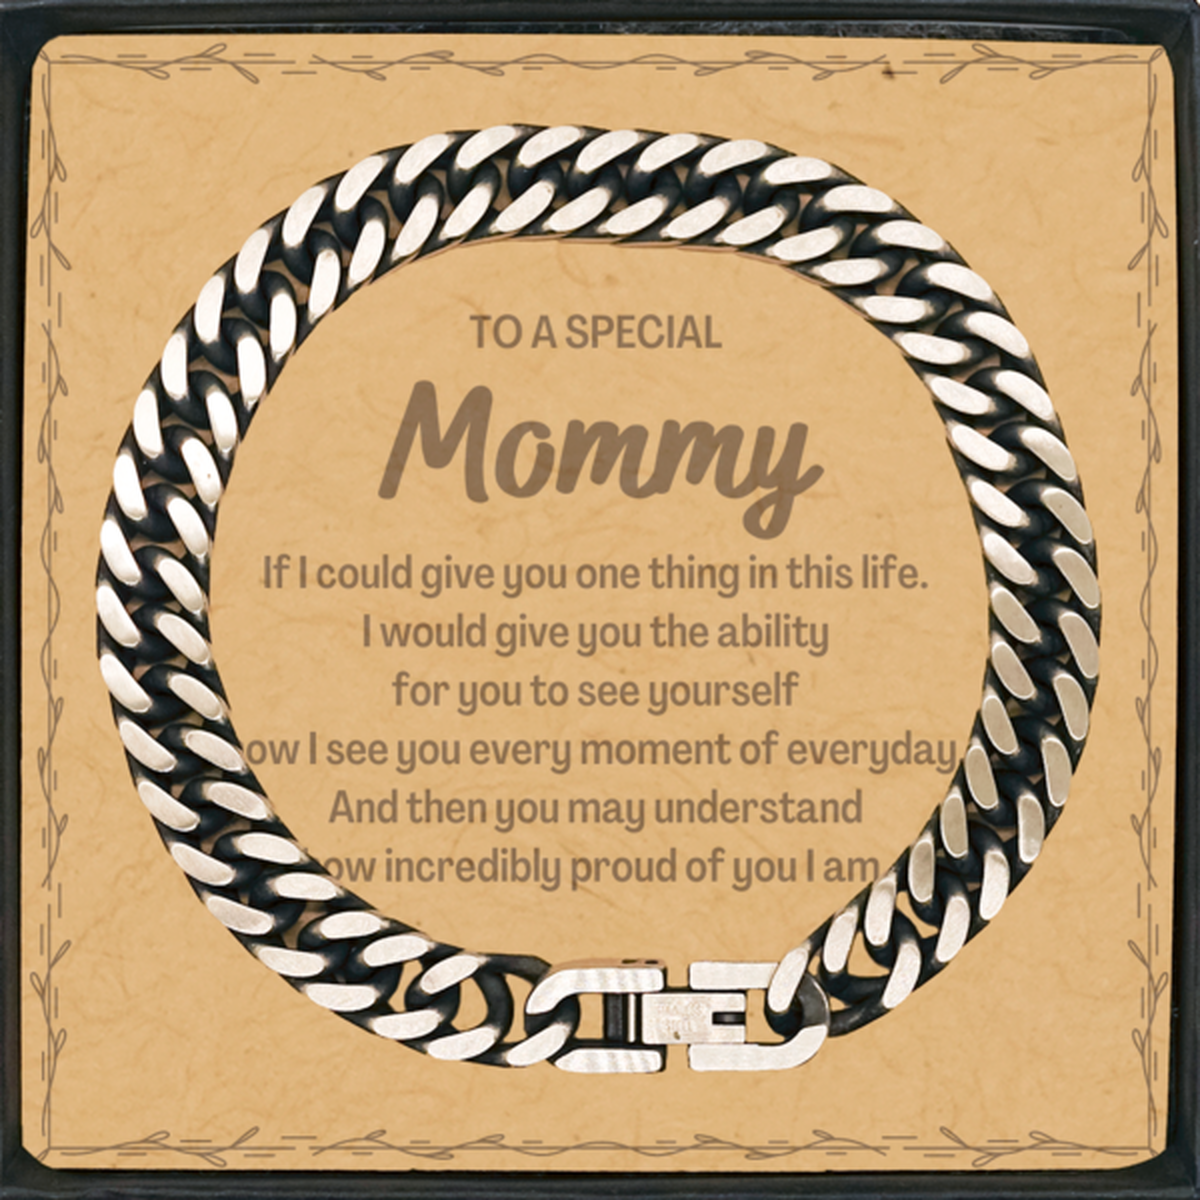 To My Mommy Cuban Link Chain Bracelet, Gifts For Mommy Message Card, Inspirational Gifts for Christmas Birthday, Epic Gifts for Mommy To A Special Mommy how incredibly proud of you I am